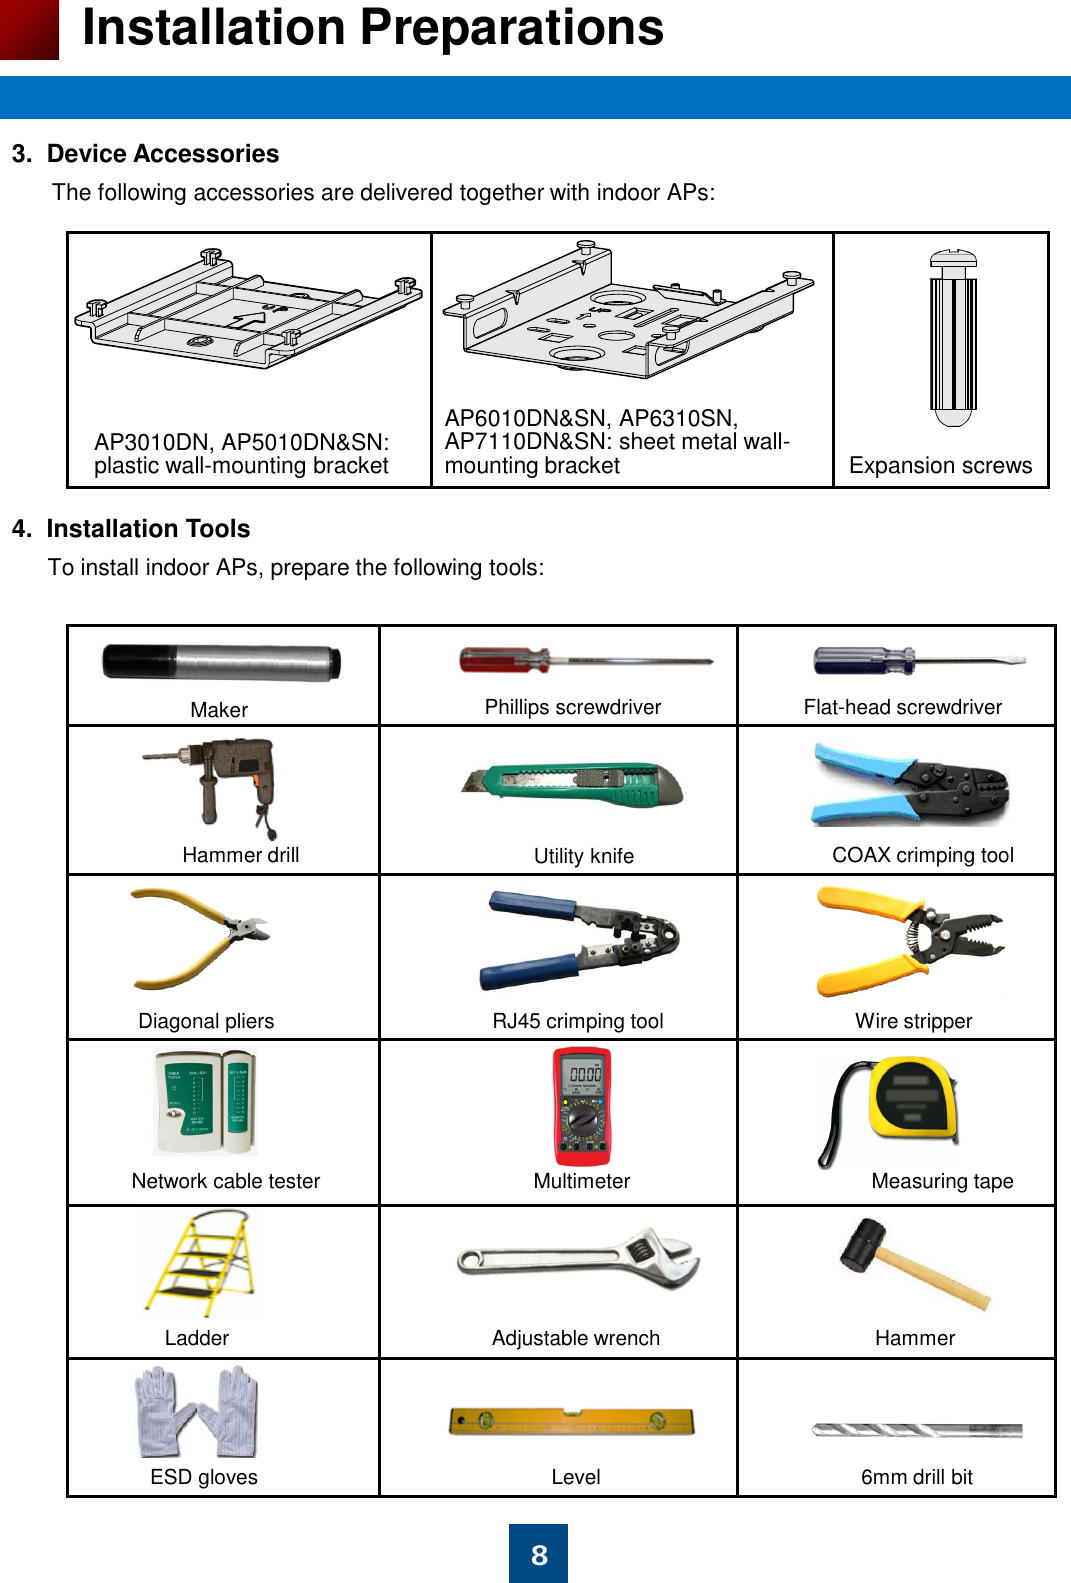 8 Installation Preparations 3.  Device Accessories      The following accessories are delivered together with indoor APs:       4.  Installation Tools       To install indoor APs, prepare the following tools:                AP6010DN&amp;SN, AP6310SN,  AP7110DN&amp;SN: sheet metal wall- mounting bracket  Expansion screws Measuring tape Phillips screwdriver  Flat-head screwdriver Utility knife Wire stripper Network cable tester  Multimeter Adjustable wrench Maker RJ45 crimping tool Diagonal pliers Ladder COAX crimping tool Hammer drill Hammer ESD gloves  Level  6mm drill bit AP3010DN, AP5010DN&amp;SN:  plastic wall-mounting bracket 